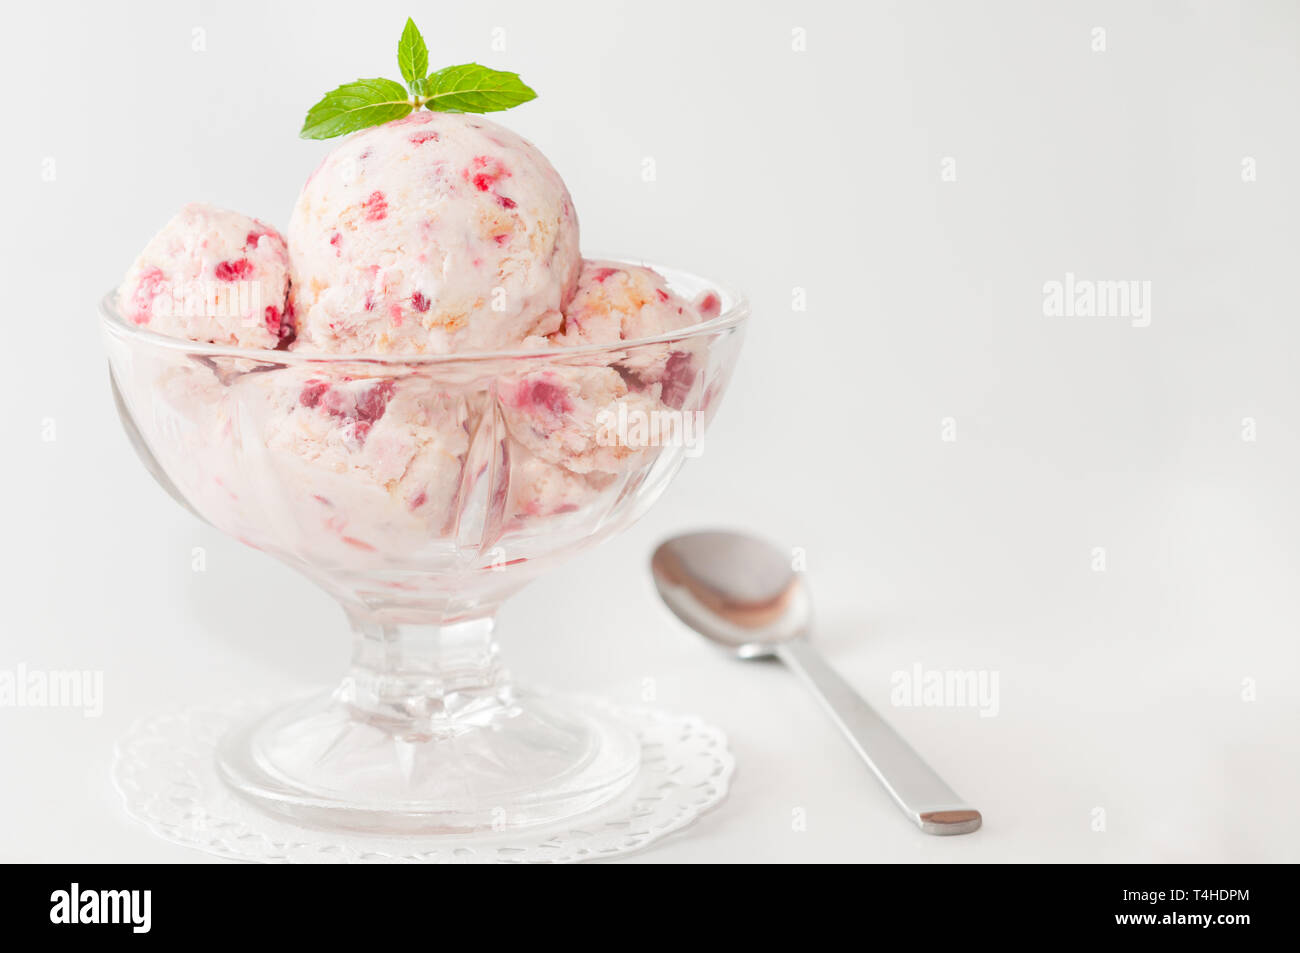 Gelato with pink fruits Stock Photo